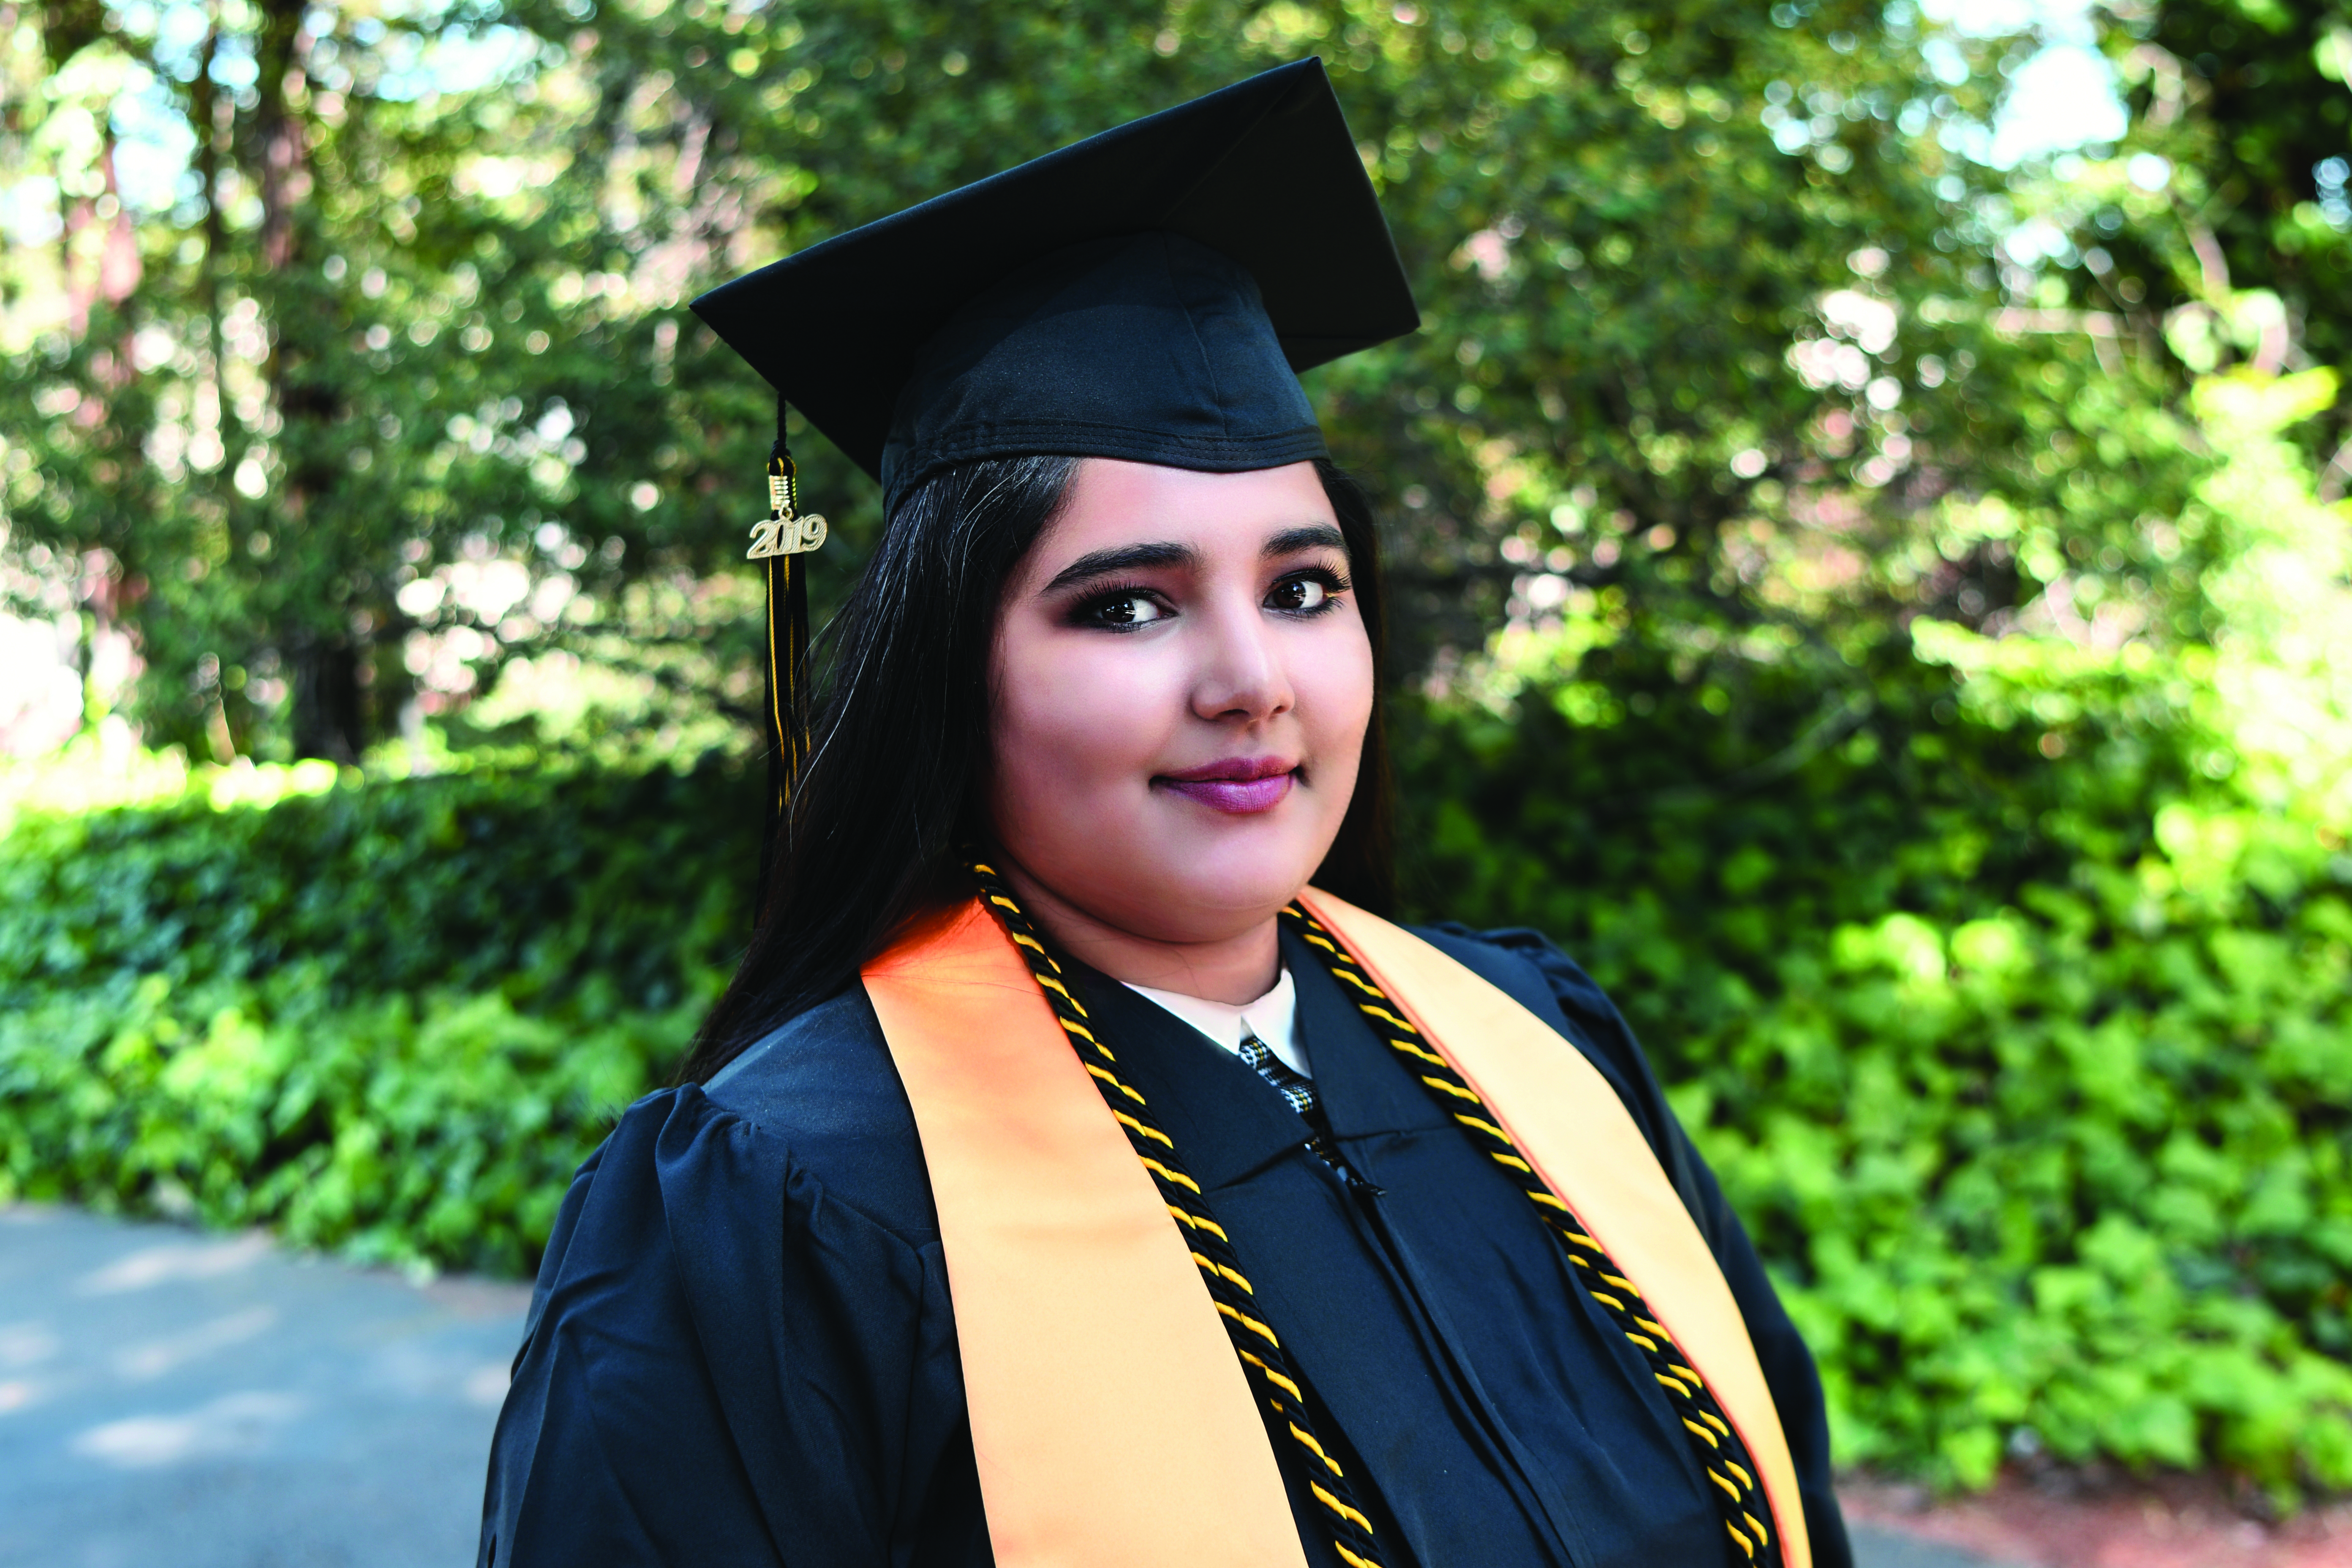 Arooj Rizvi has been chosen as this year's student speaker at San Joaquin Delta College's 84th annual Commencement. Arooj, who immigrated to the U.S. from Pakistan almost a decade ago, credits Delta with helping her integrate into society.